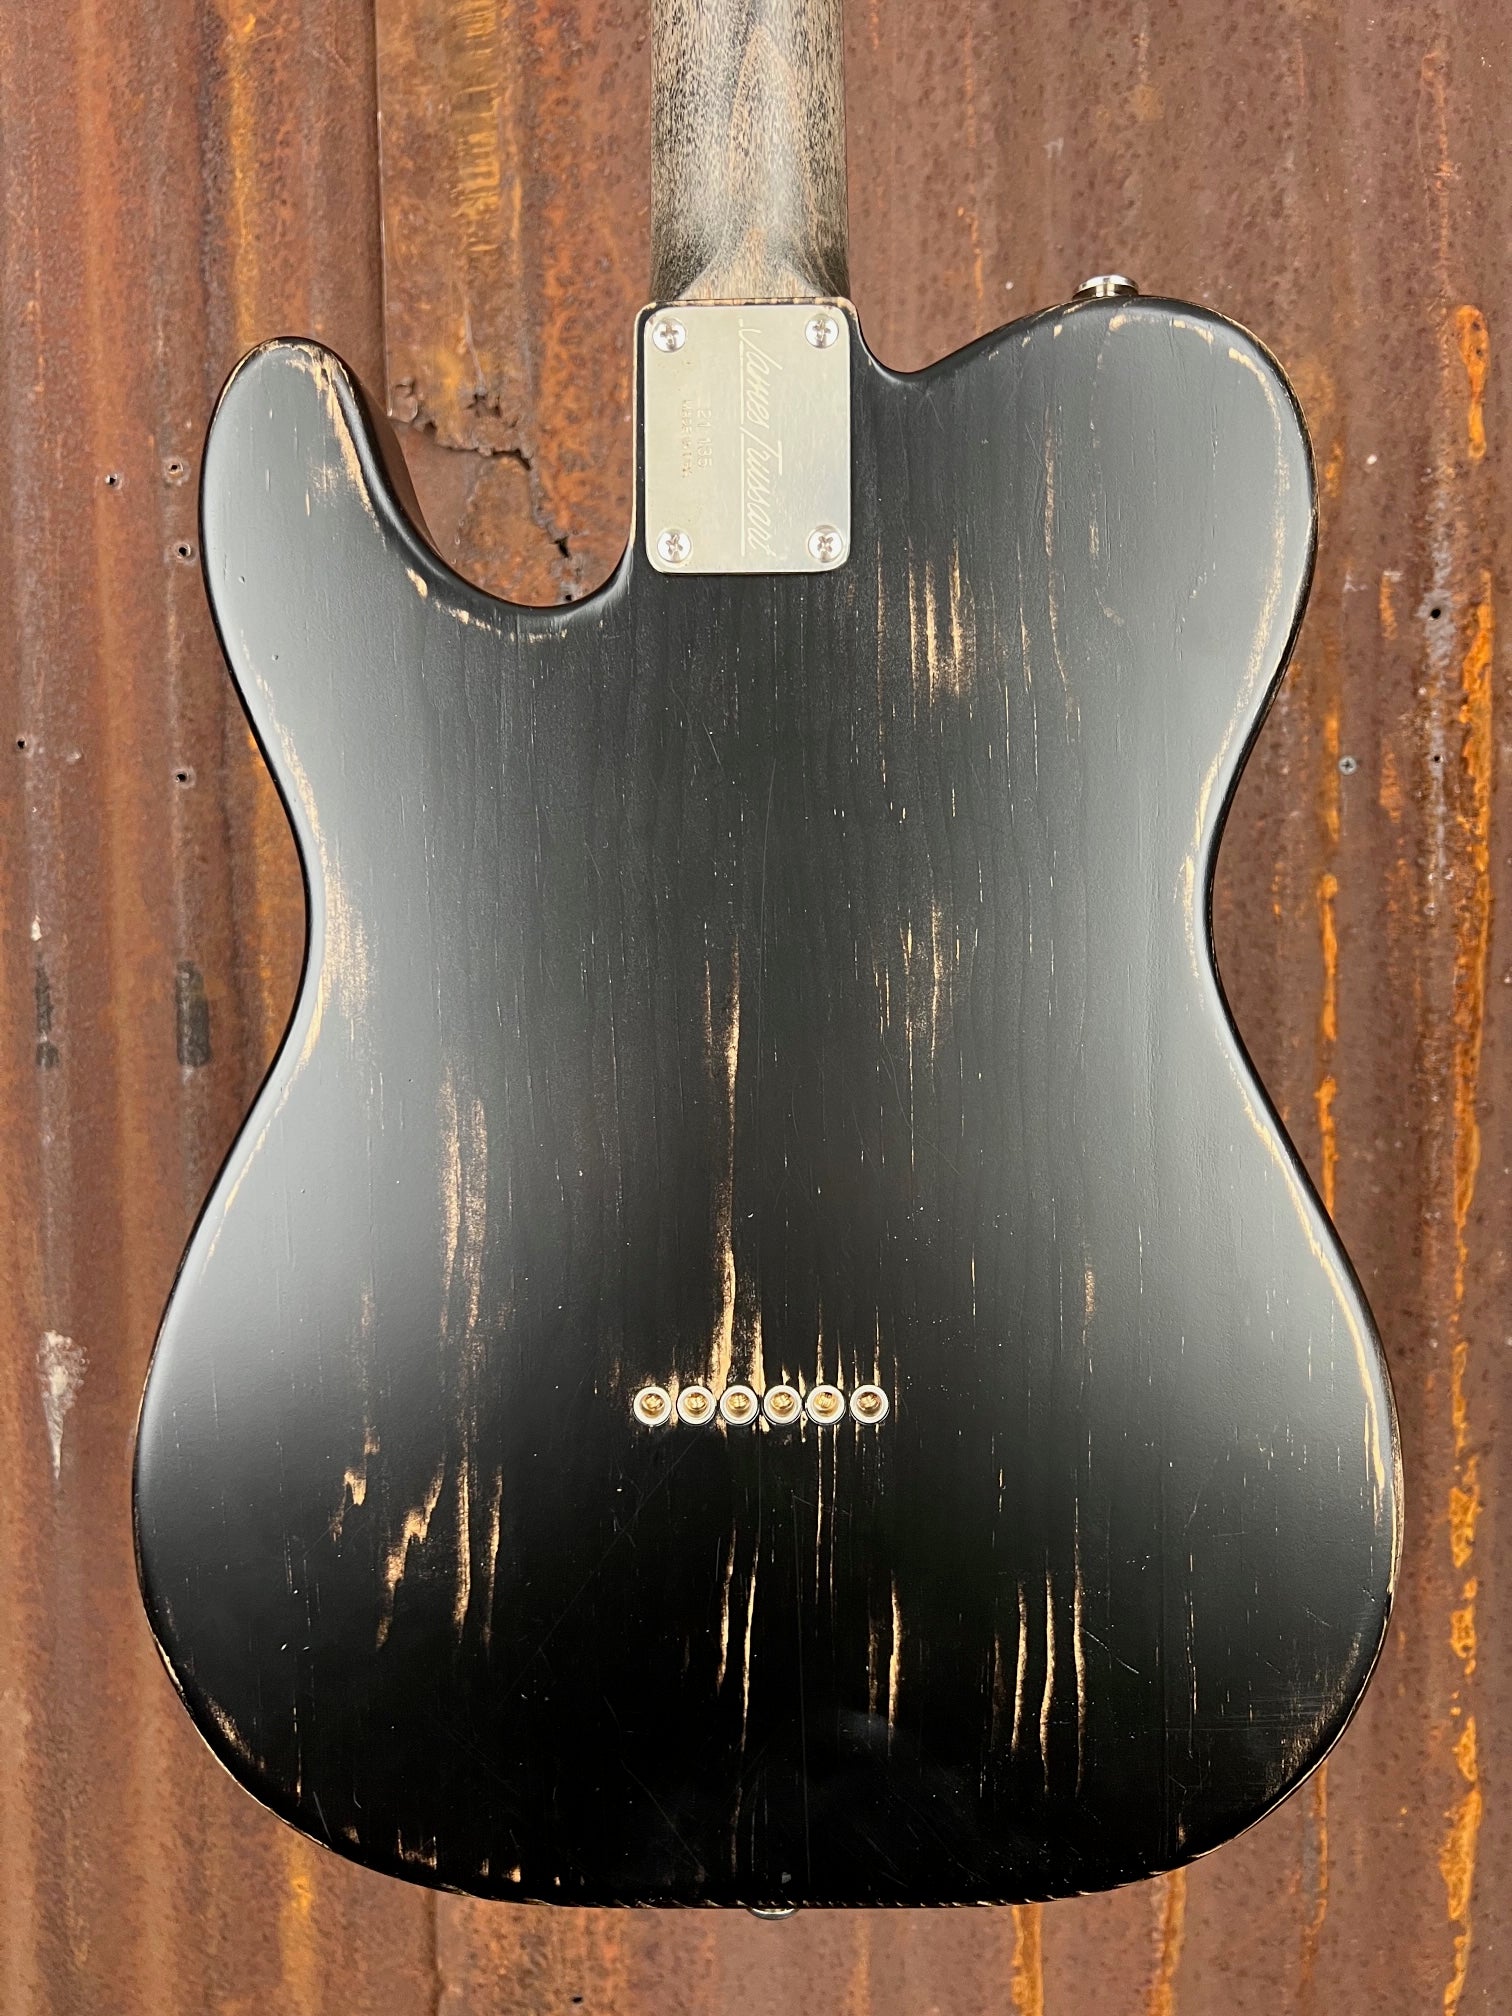 21135 Antique Stainless Paisley SteelTopCaster